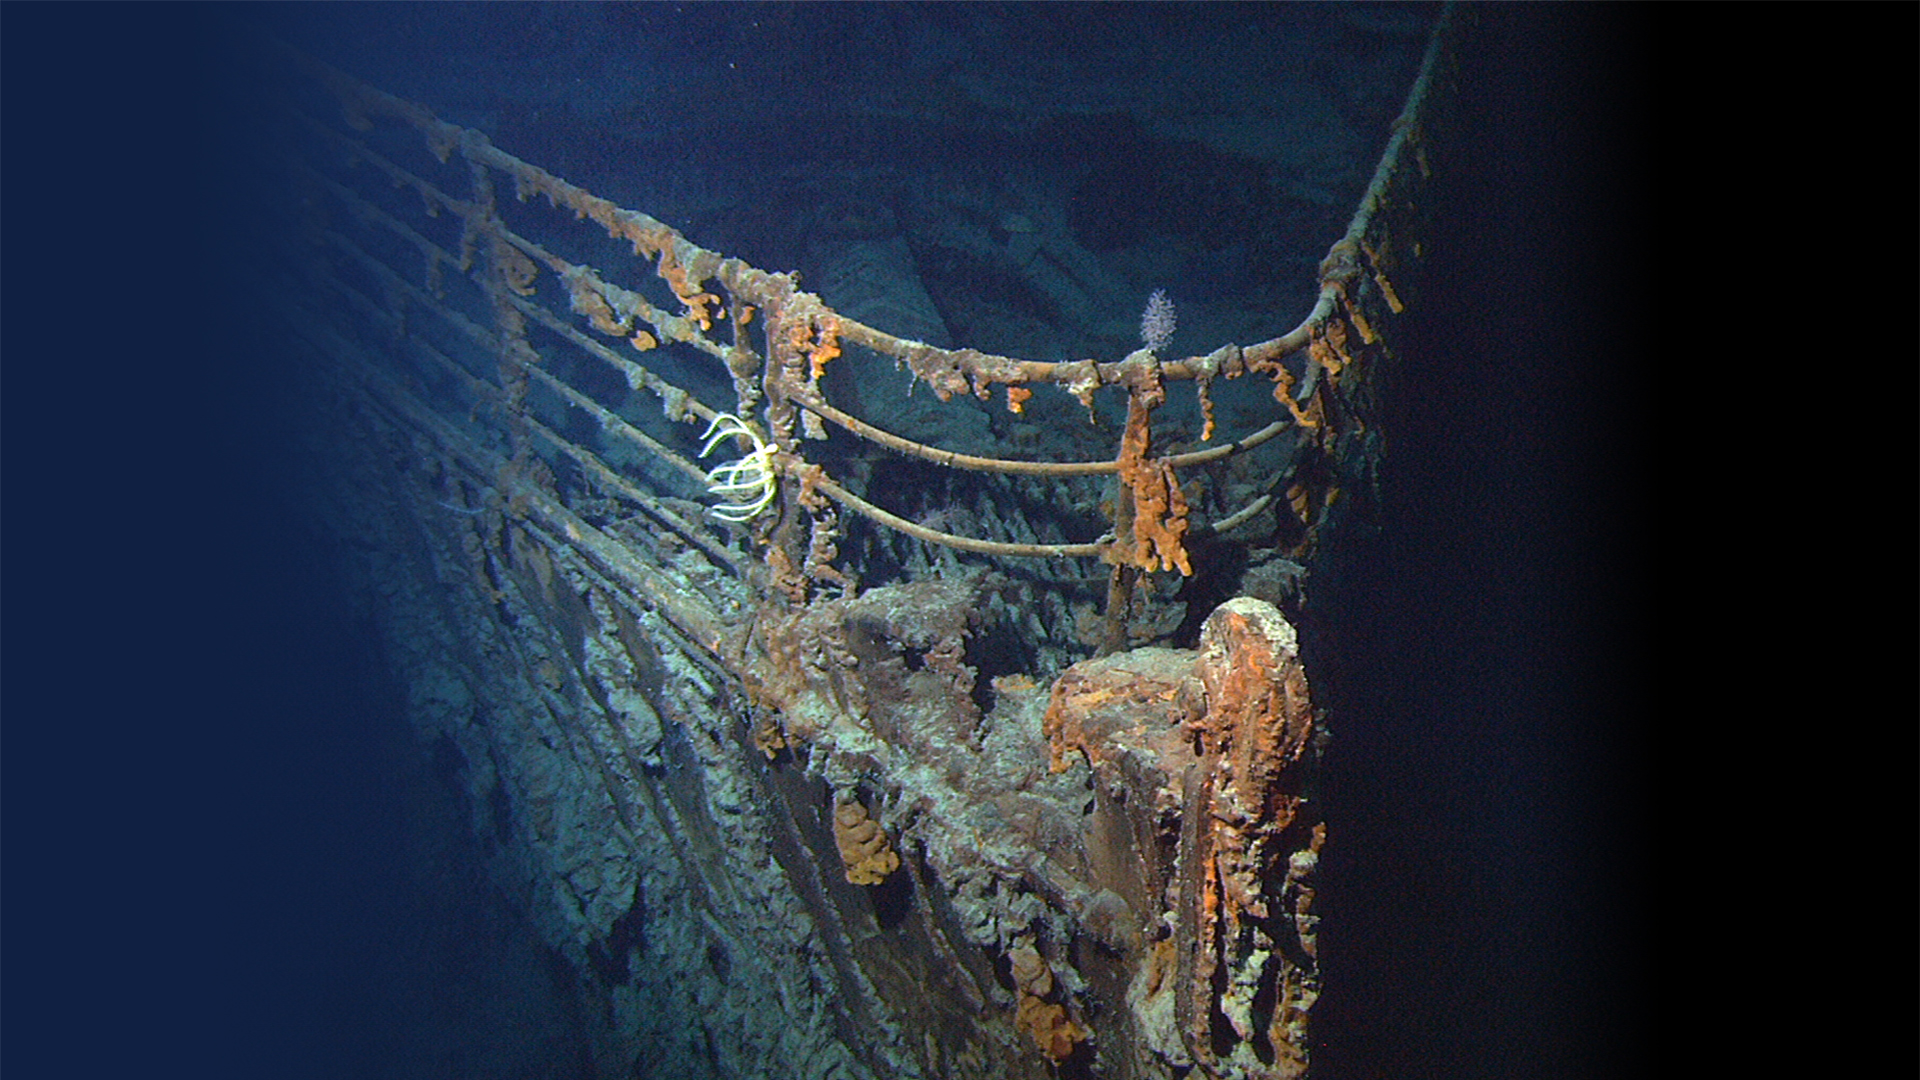 New Footage Of The Titanic Has Some Experts Predicting The Shipwreck Might Have About 30 Years Left Time